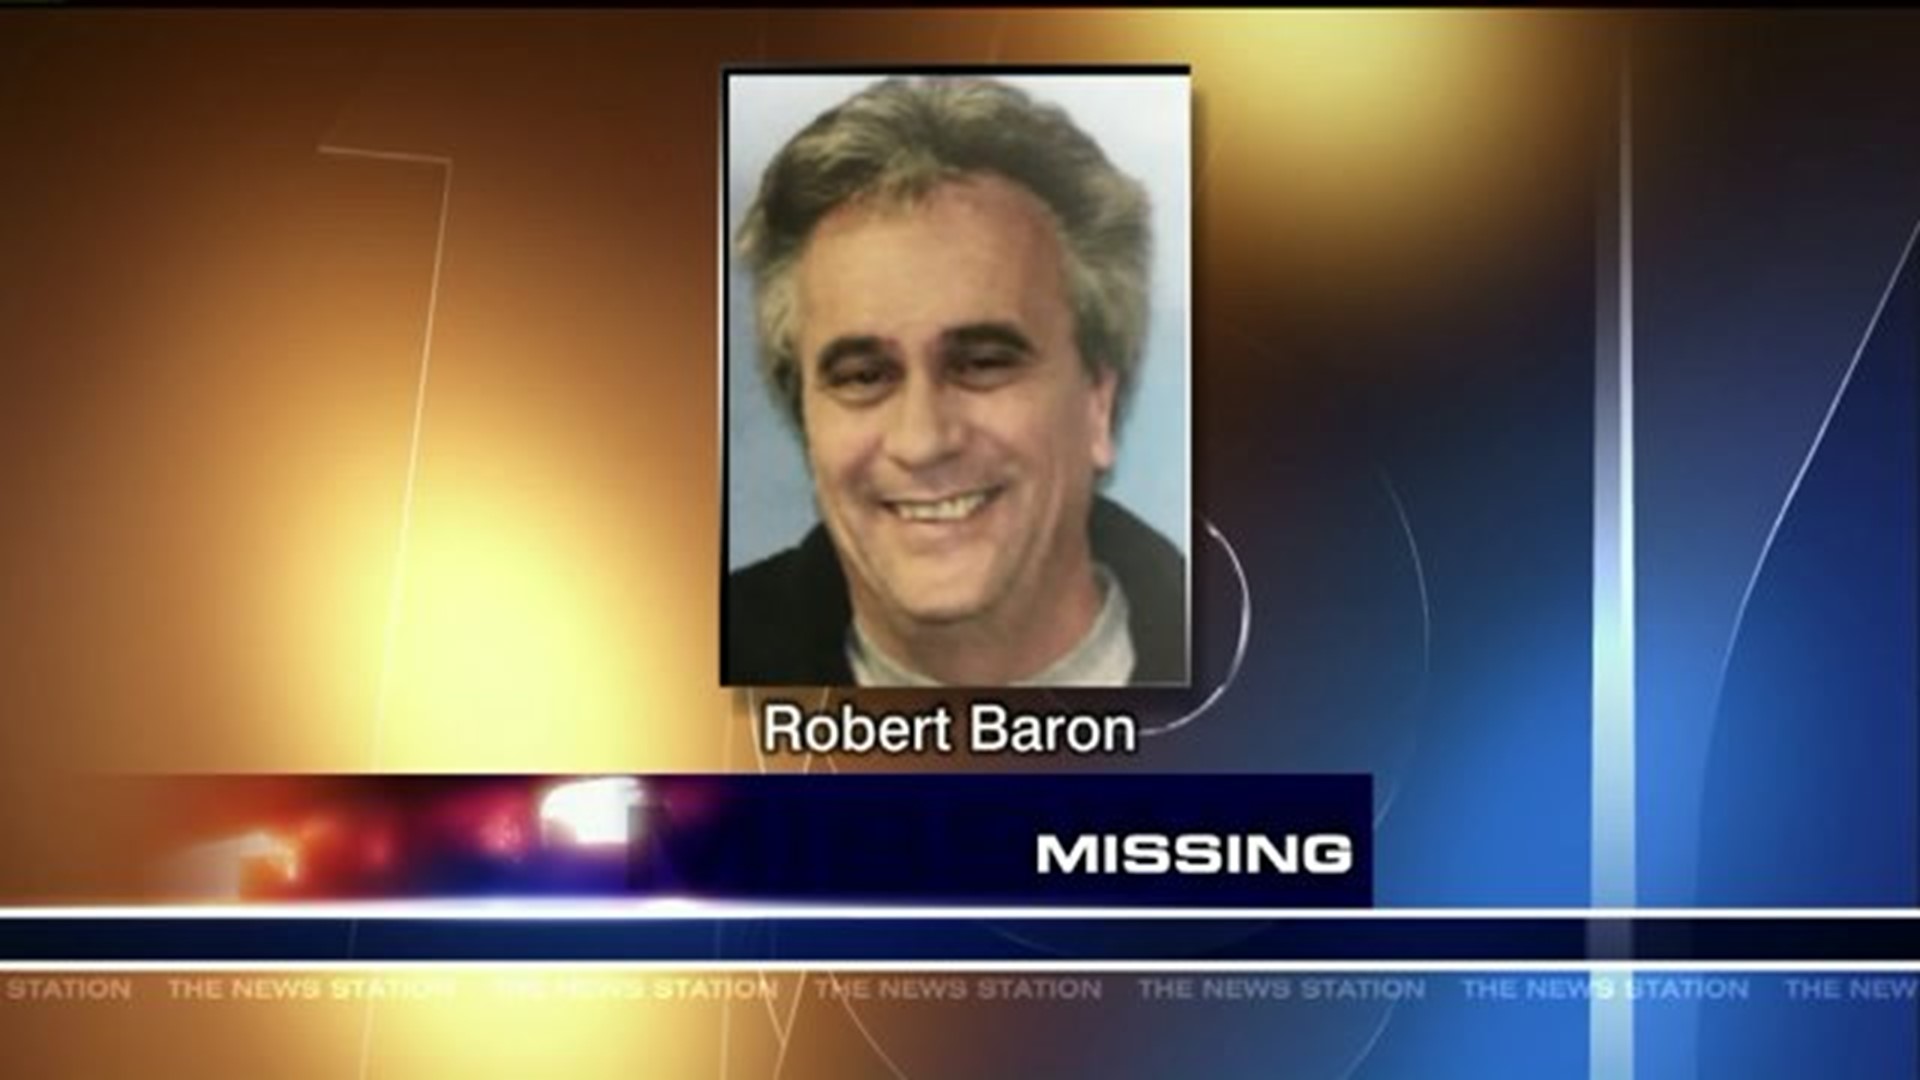 Family of Missing Old Forge Man Offering $5,000 Reward